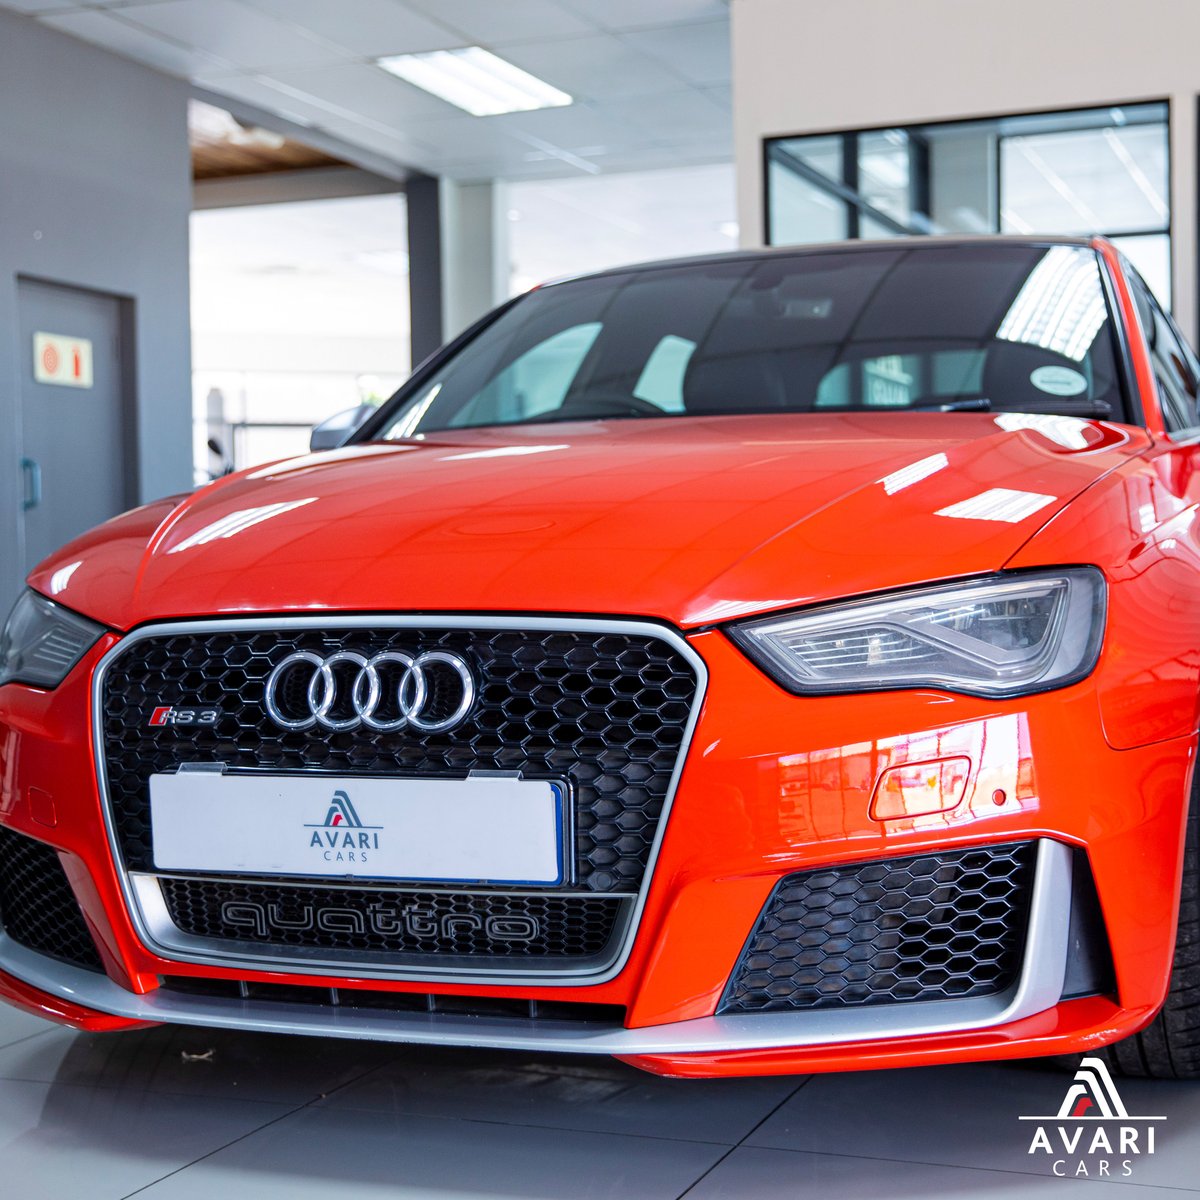 Red is just beautiful on the Audi RS3... What do you think?

avaricars.co.za
#avaricars #fyp #thebigday #carclubsa
#carrentals #carrentalservice #rentalcars